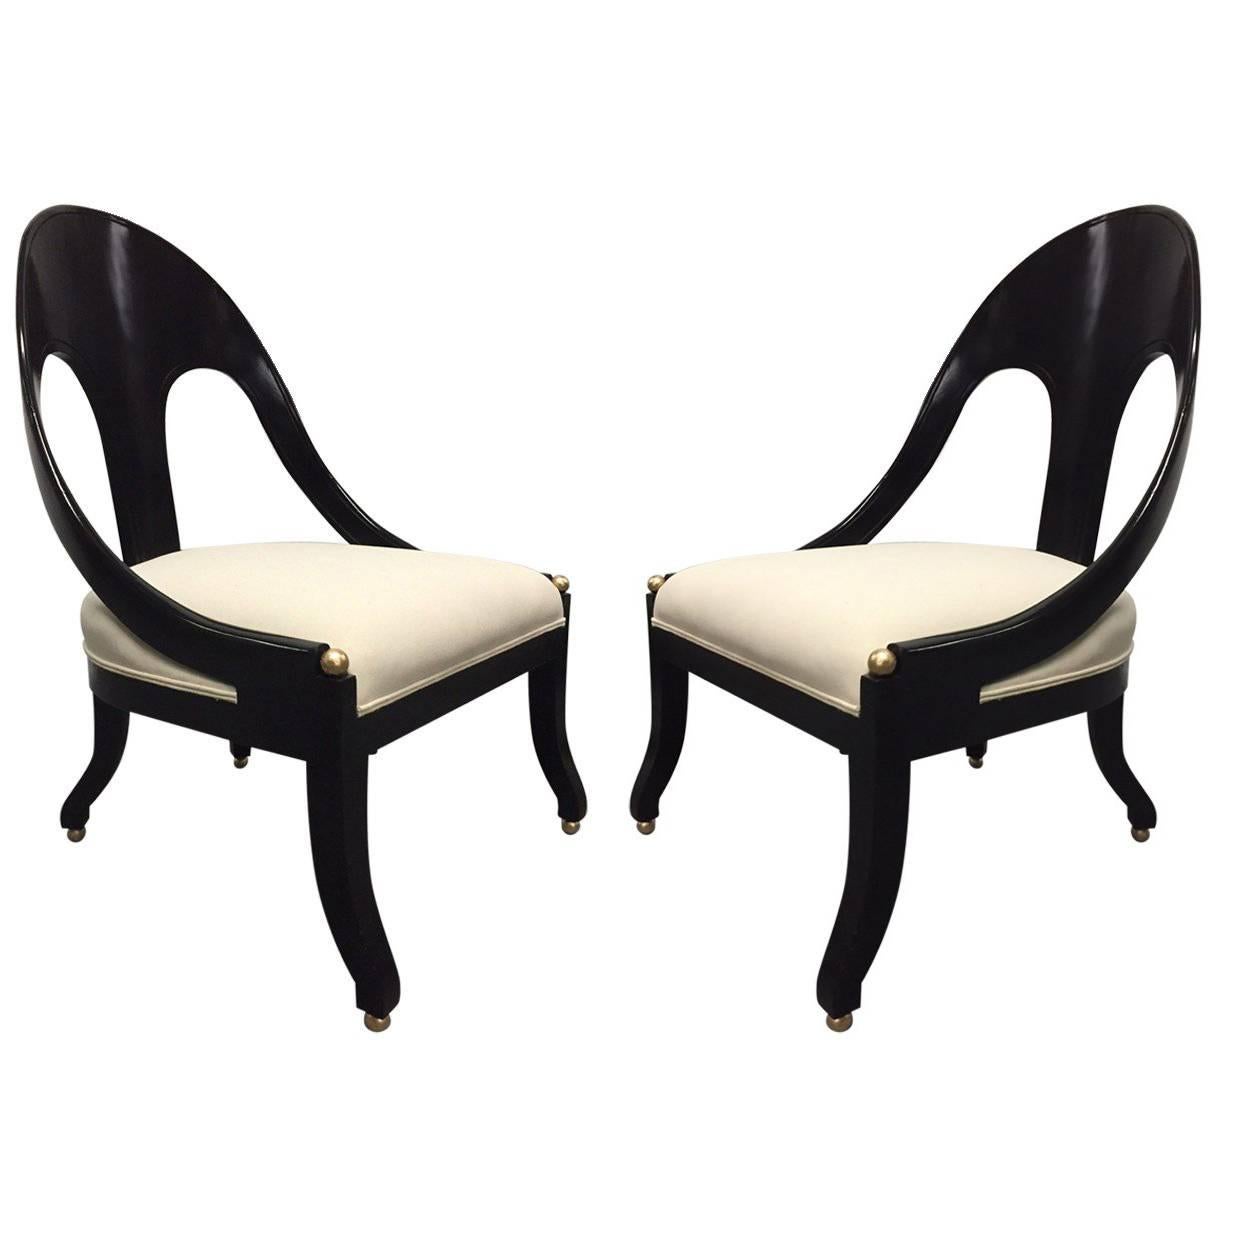 Pair of Neoclassical Style Spoon Back Chairs